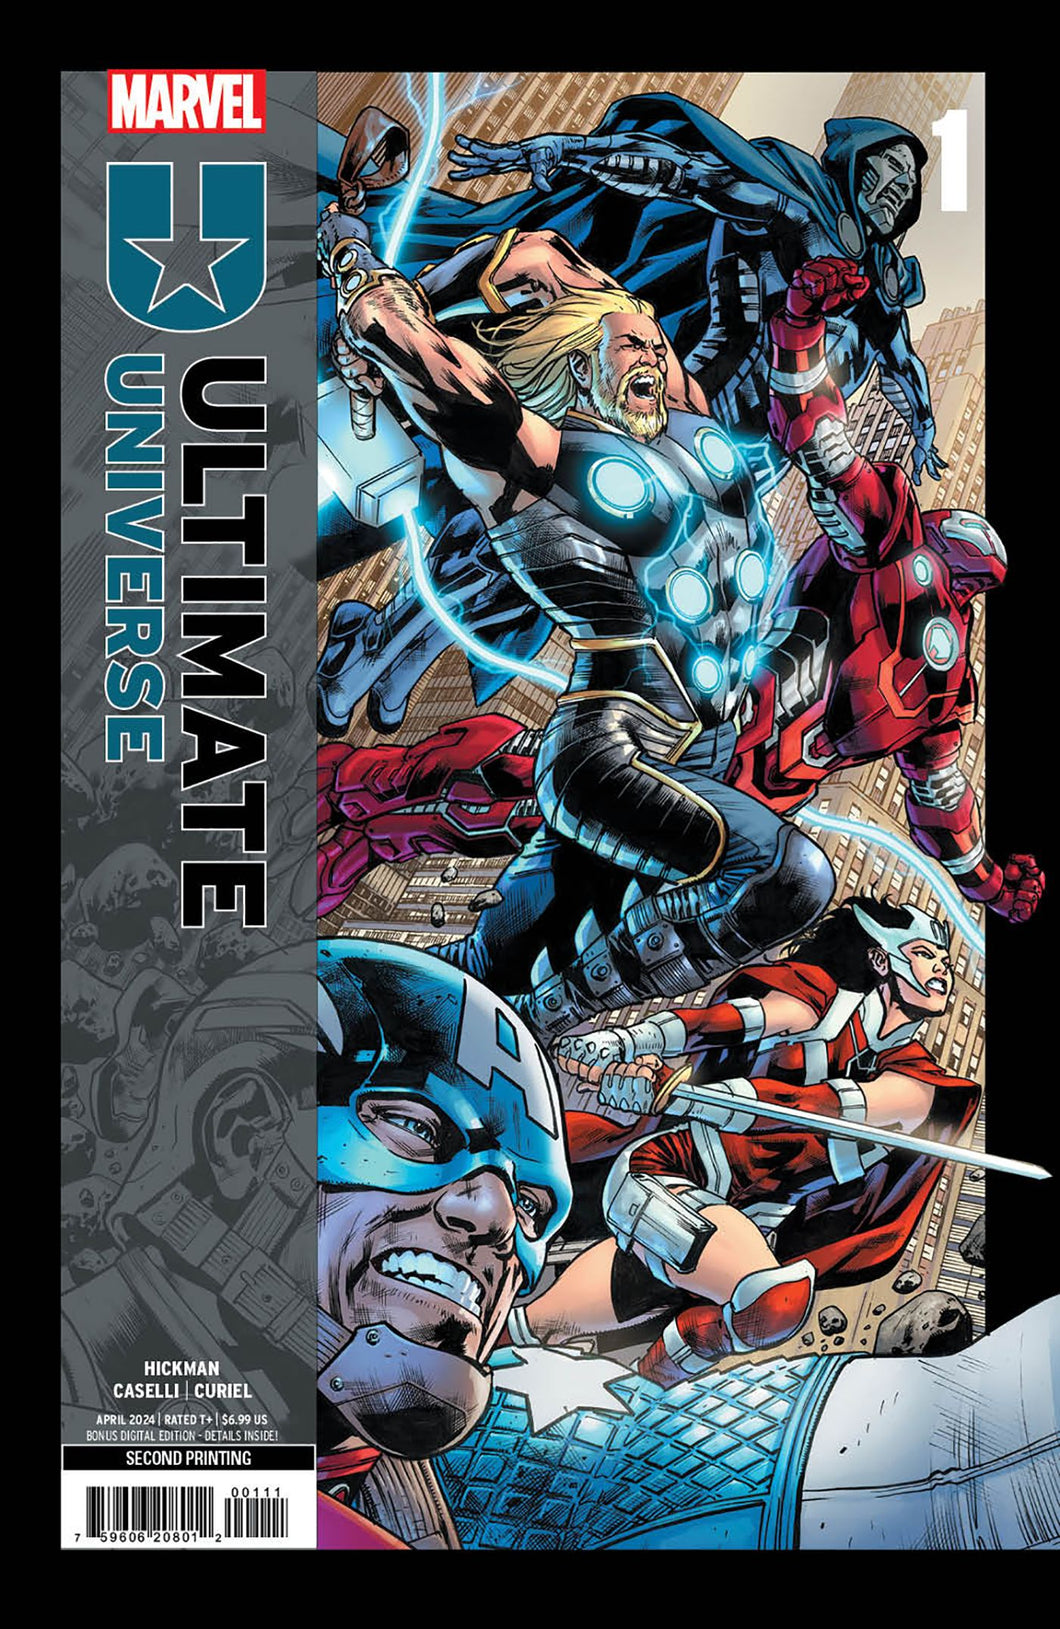 ULTIMATE UNIVERSE #1 - 2nd PRINT (BRYAN HITCH VARIANT)